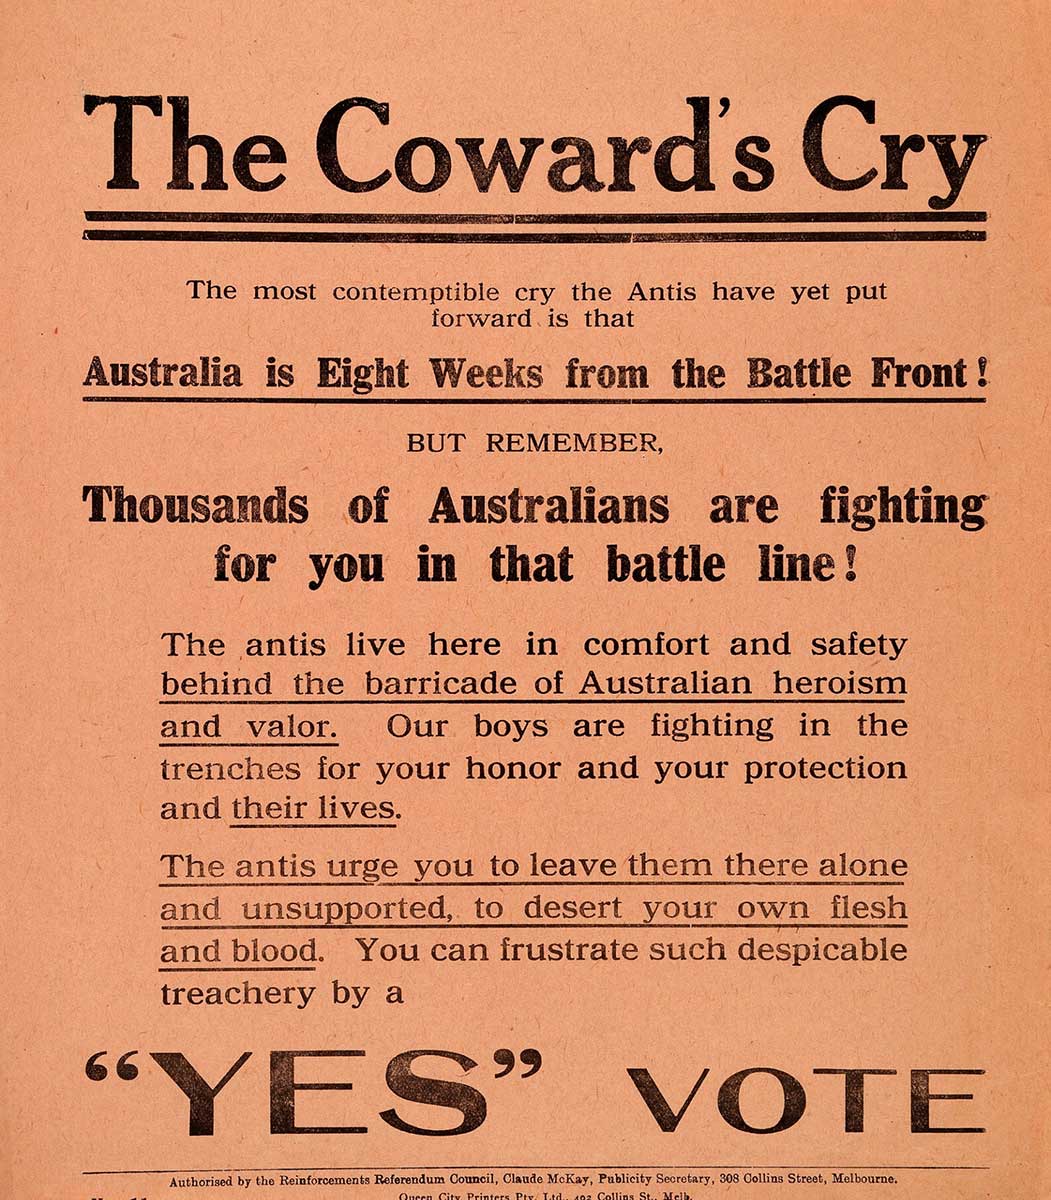 Leaflet on the Referendum titled 'The Coward's Cry'.